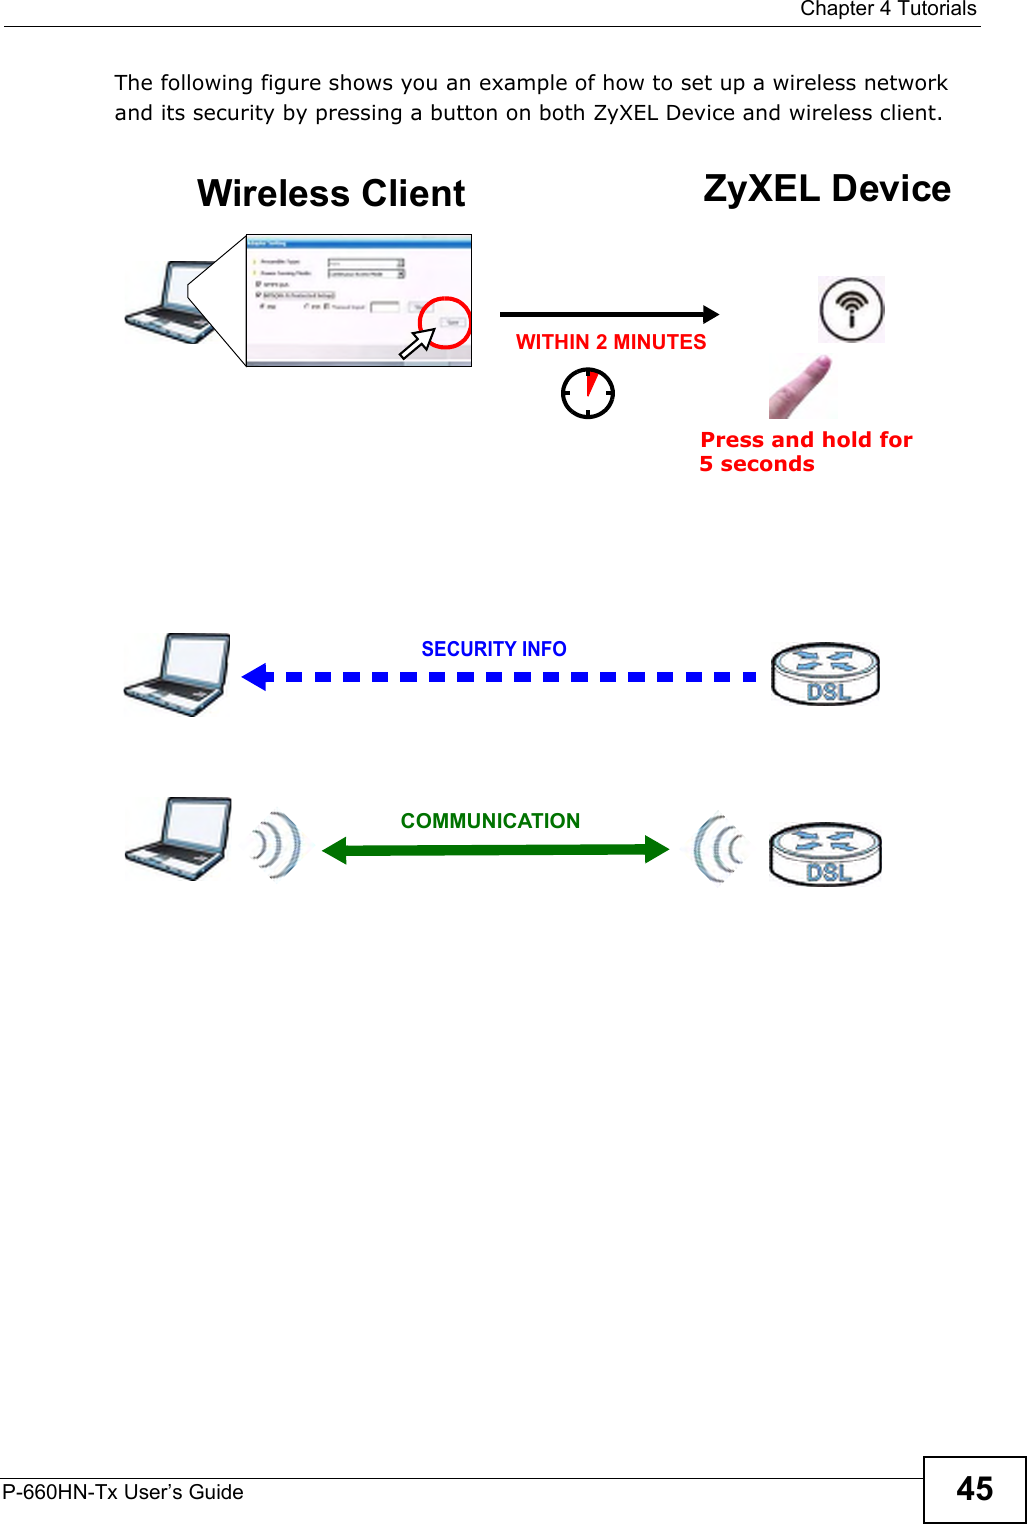  Chapter 4 TutorialsP-660HN-Tx User’s Guide 45The following figure shows you an example of how to set up a wireless network and its security by pressing a button on both ZyXEL Device and wireless client.Example WPS Process: PBC MethodWireless Client ZyXEL DeviceSECURITY INFOCOMMUNICATIONWITHIN 2 MINUTESPress and hold for   5 seconds